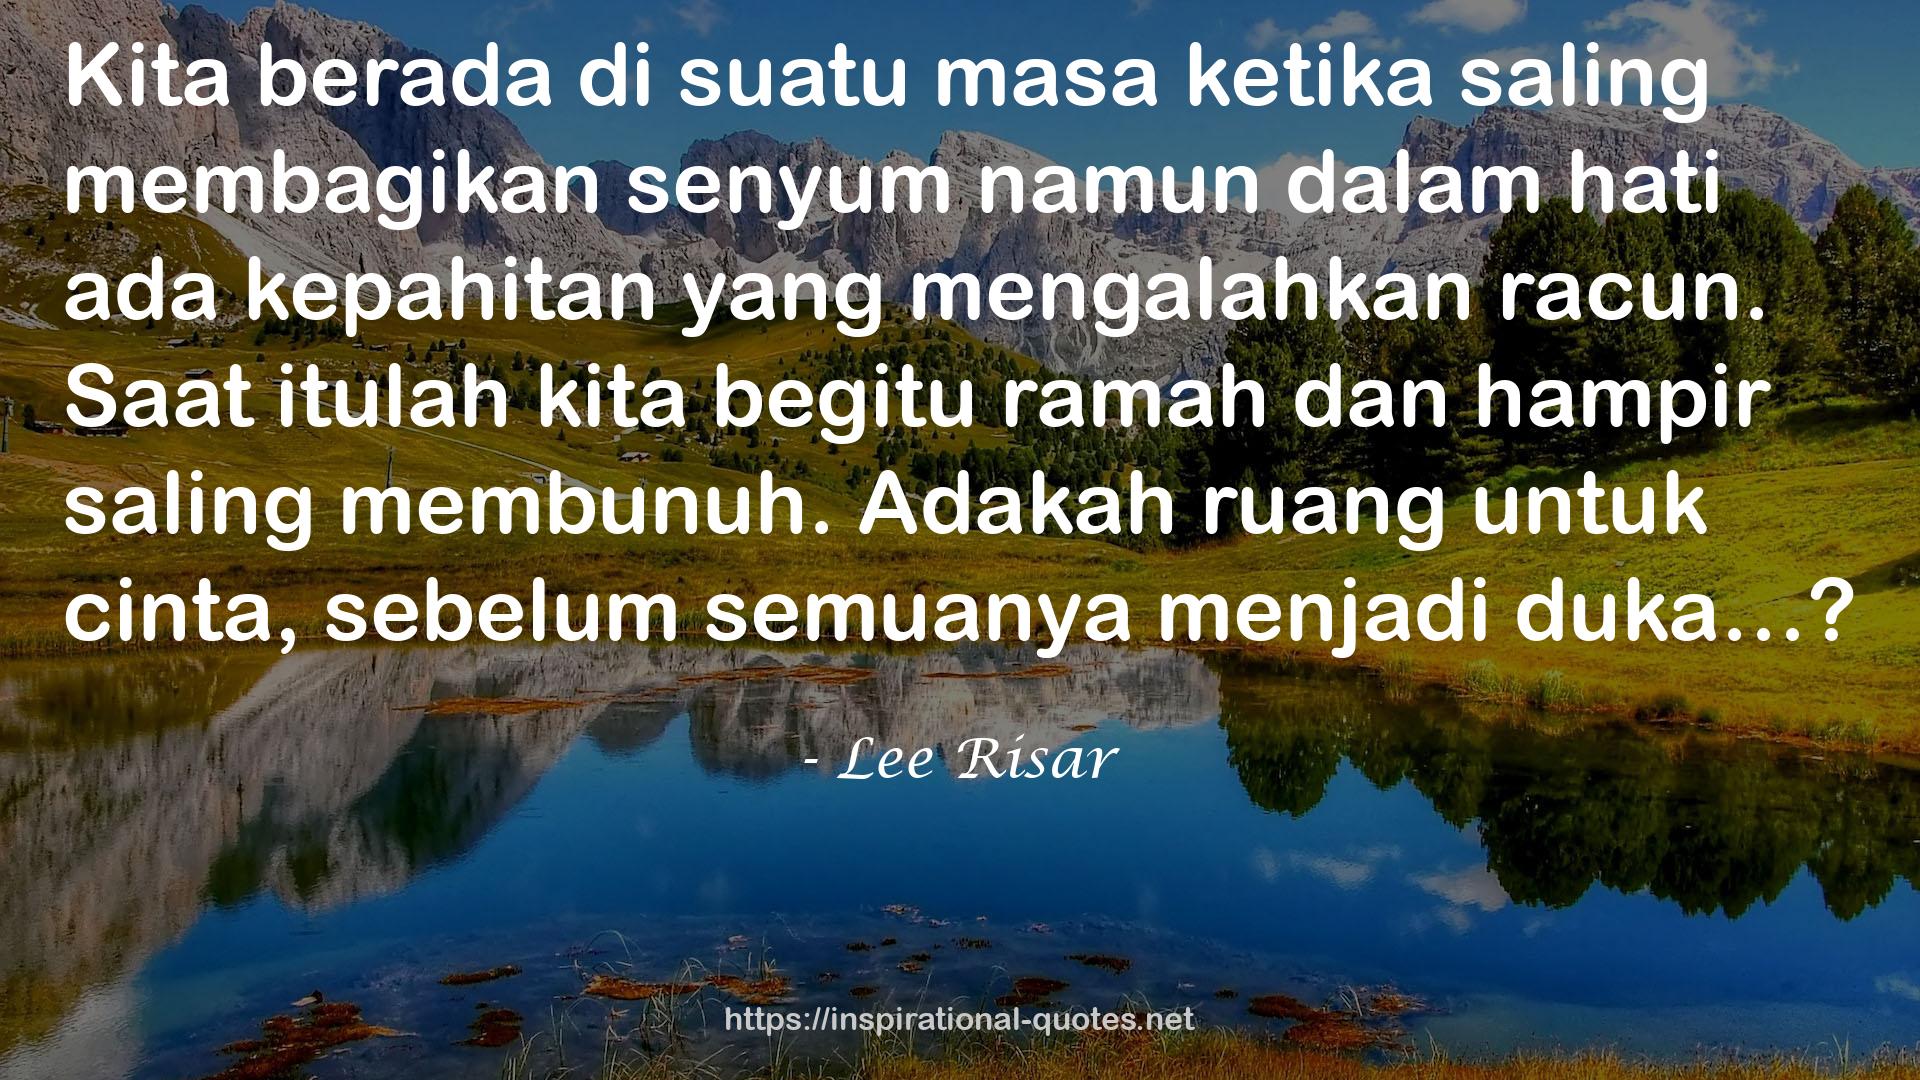 Lee Risar QUOTES